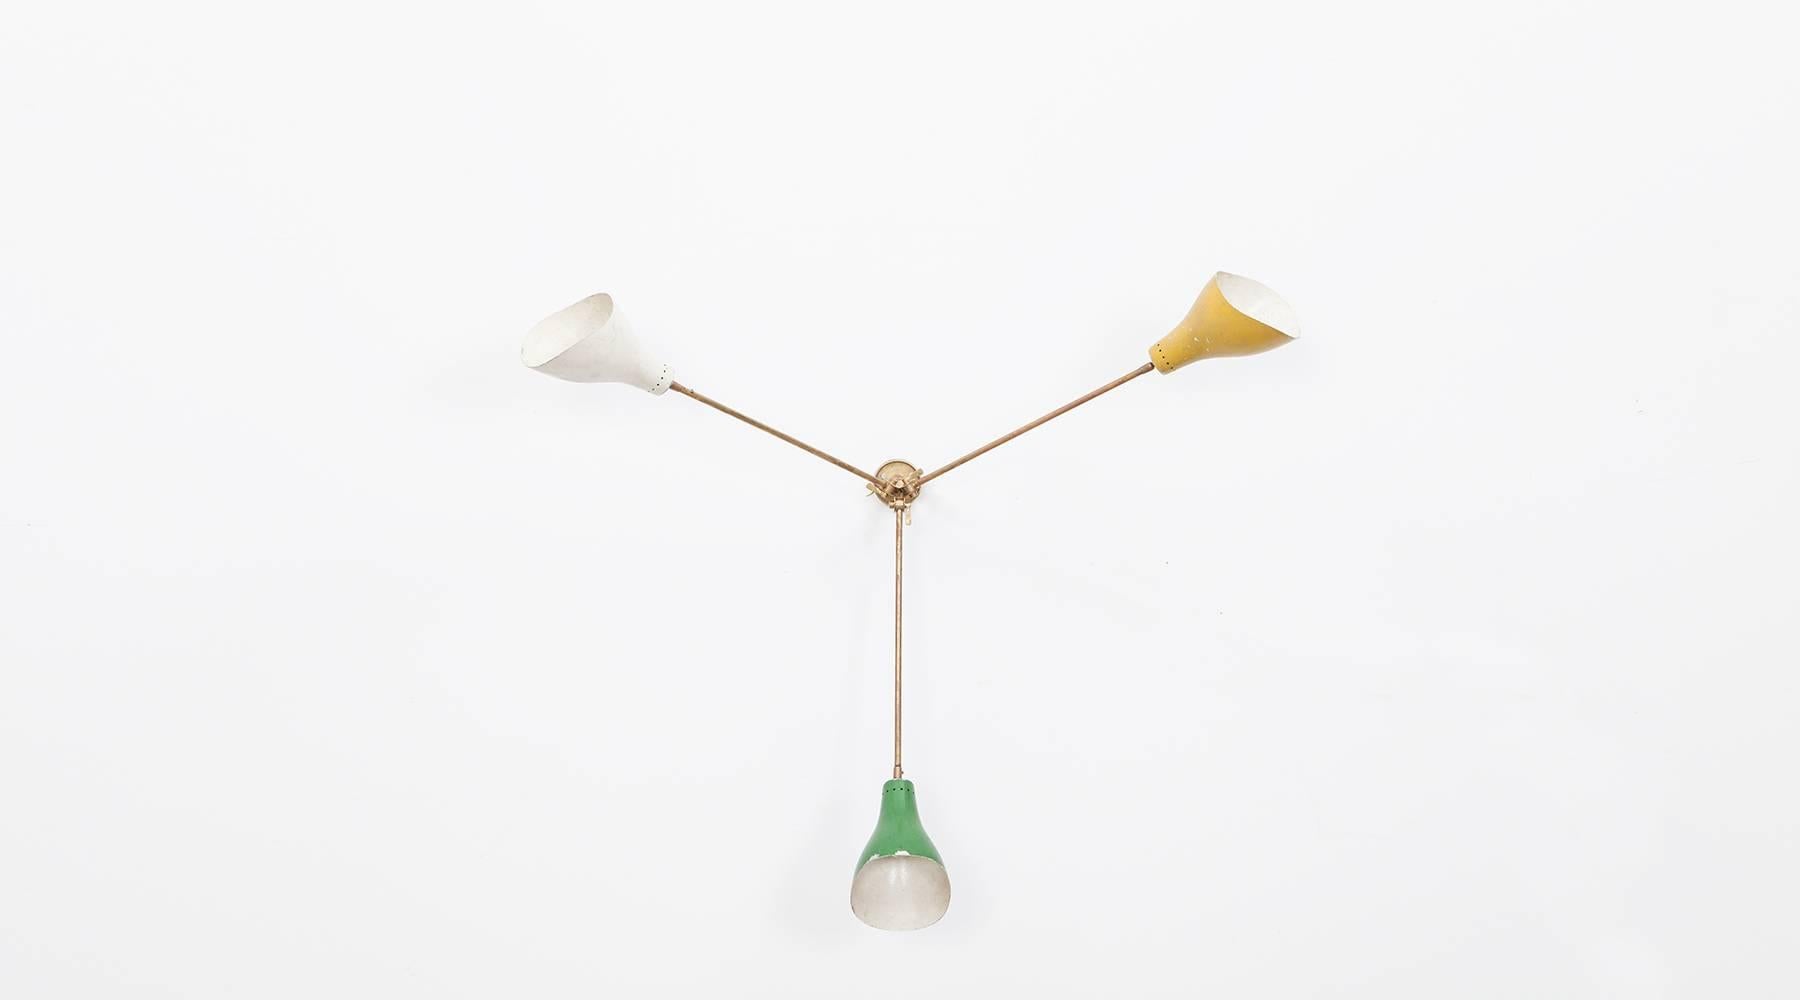 Delightful three-arm adjustable wall or ceiling lamp by Stilnovo. Features three colored shades in bright yellow, green and white. The lamp comes in exceptional vintage condition. Manufactured by Stilnovo. 

The Italian lamp design movement of